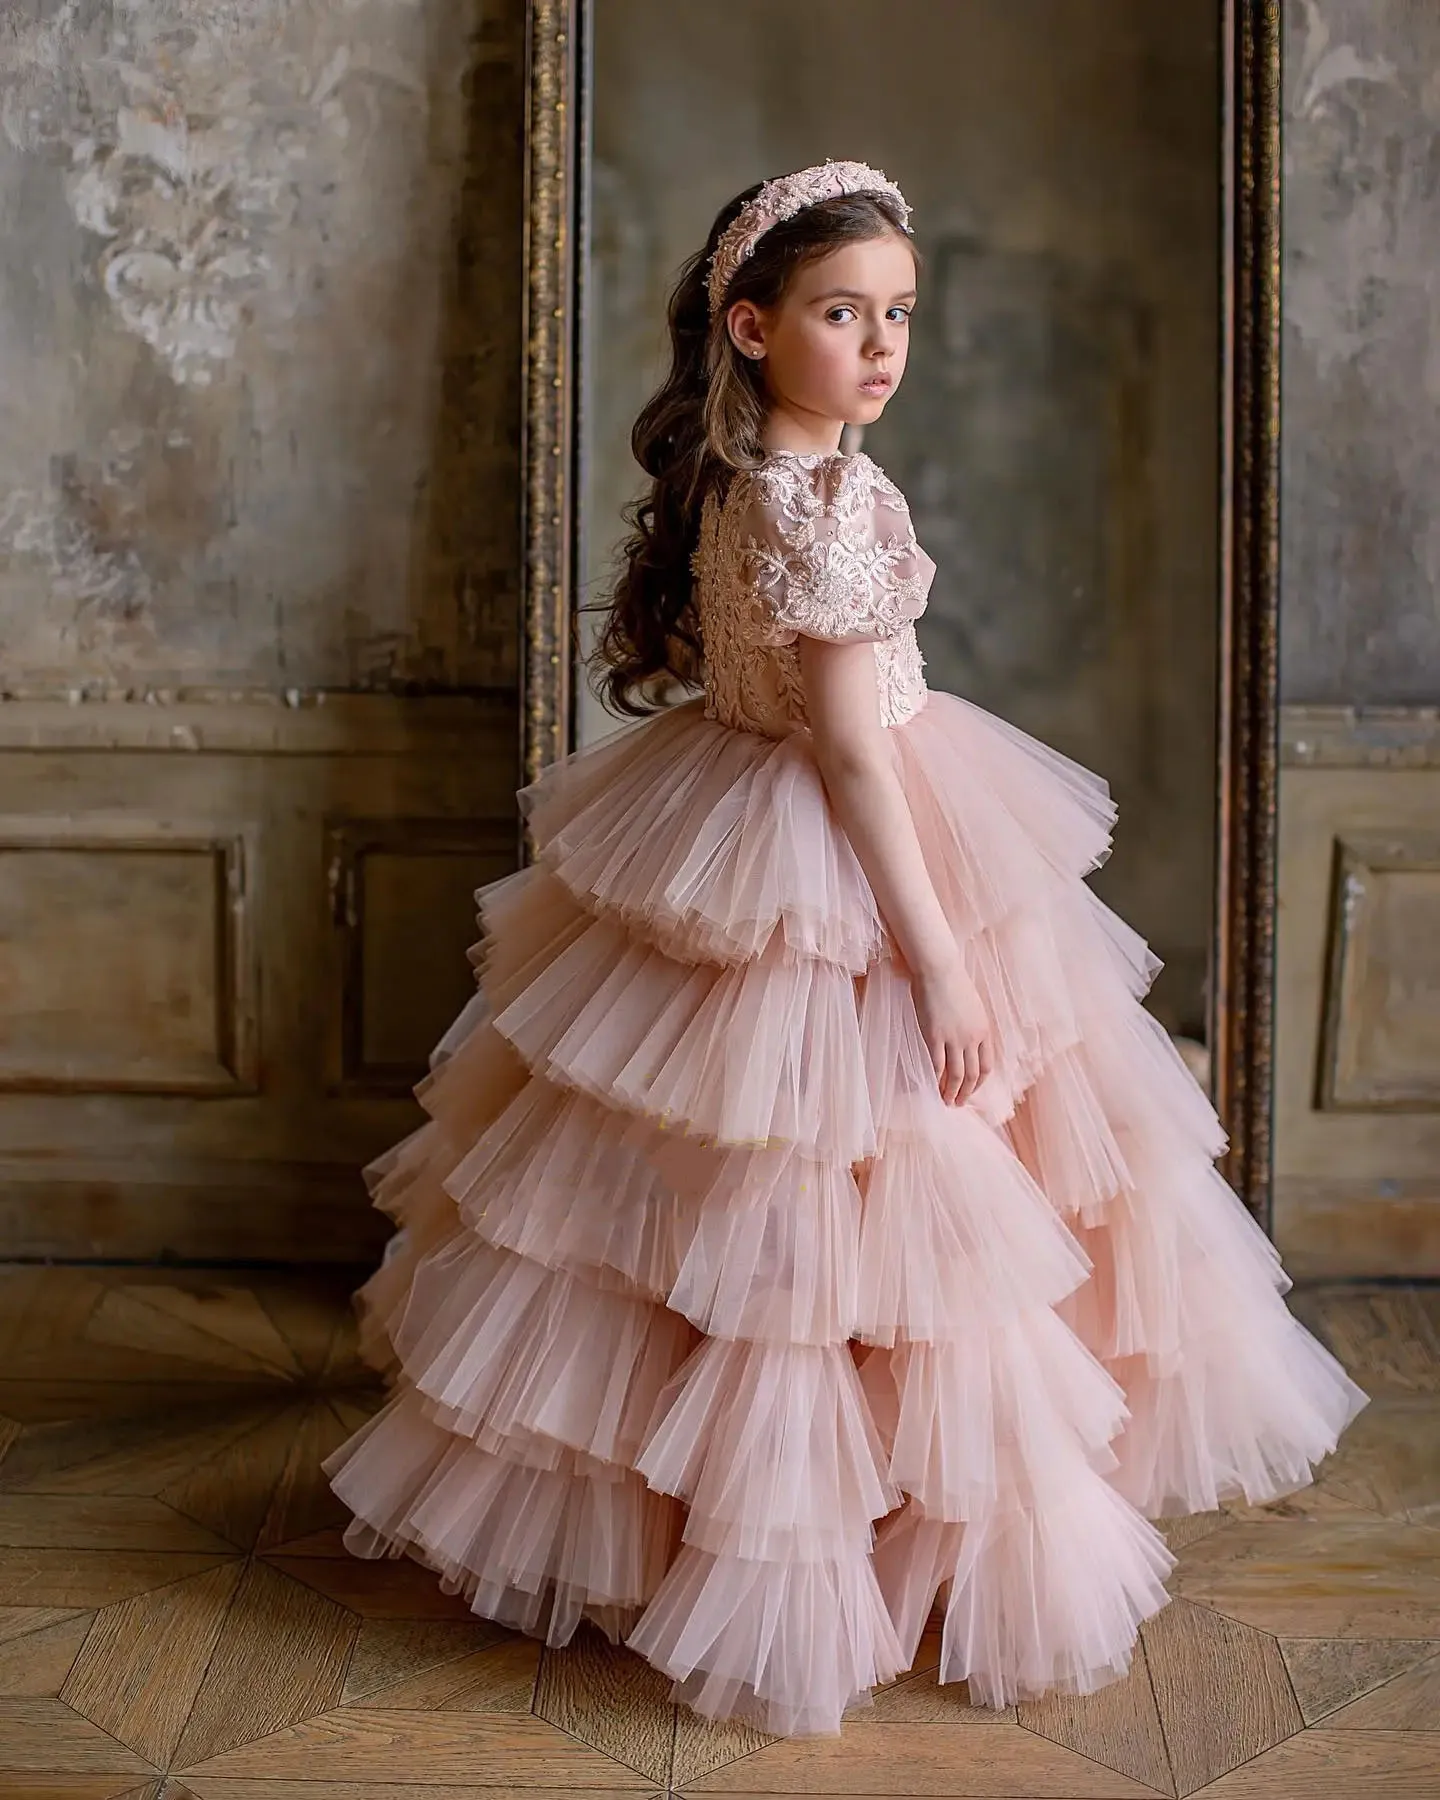 

2023 Lace Flower Girl Dresses Puffy Tulle Sky Blue/Pink Layered Floor Length First Communion Dress Birthday Party Ball Gown